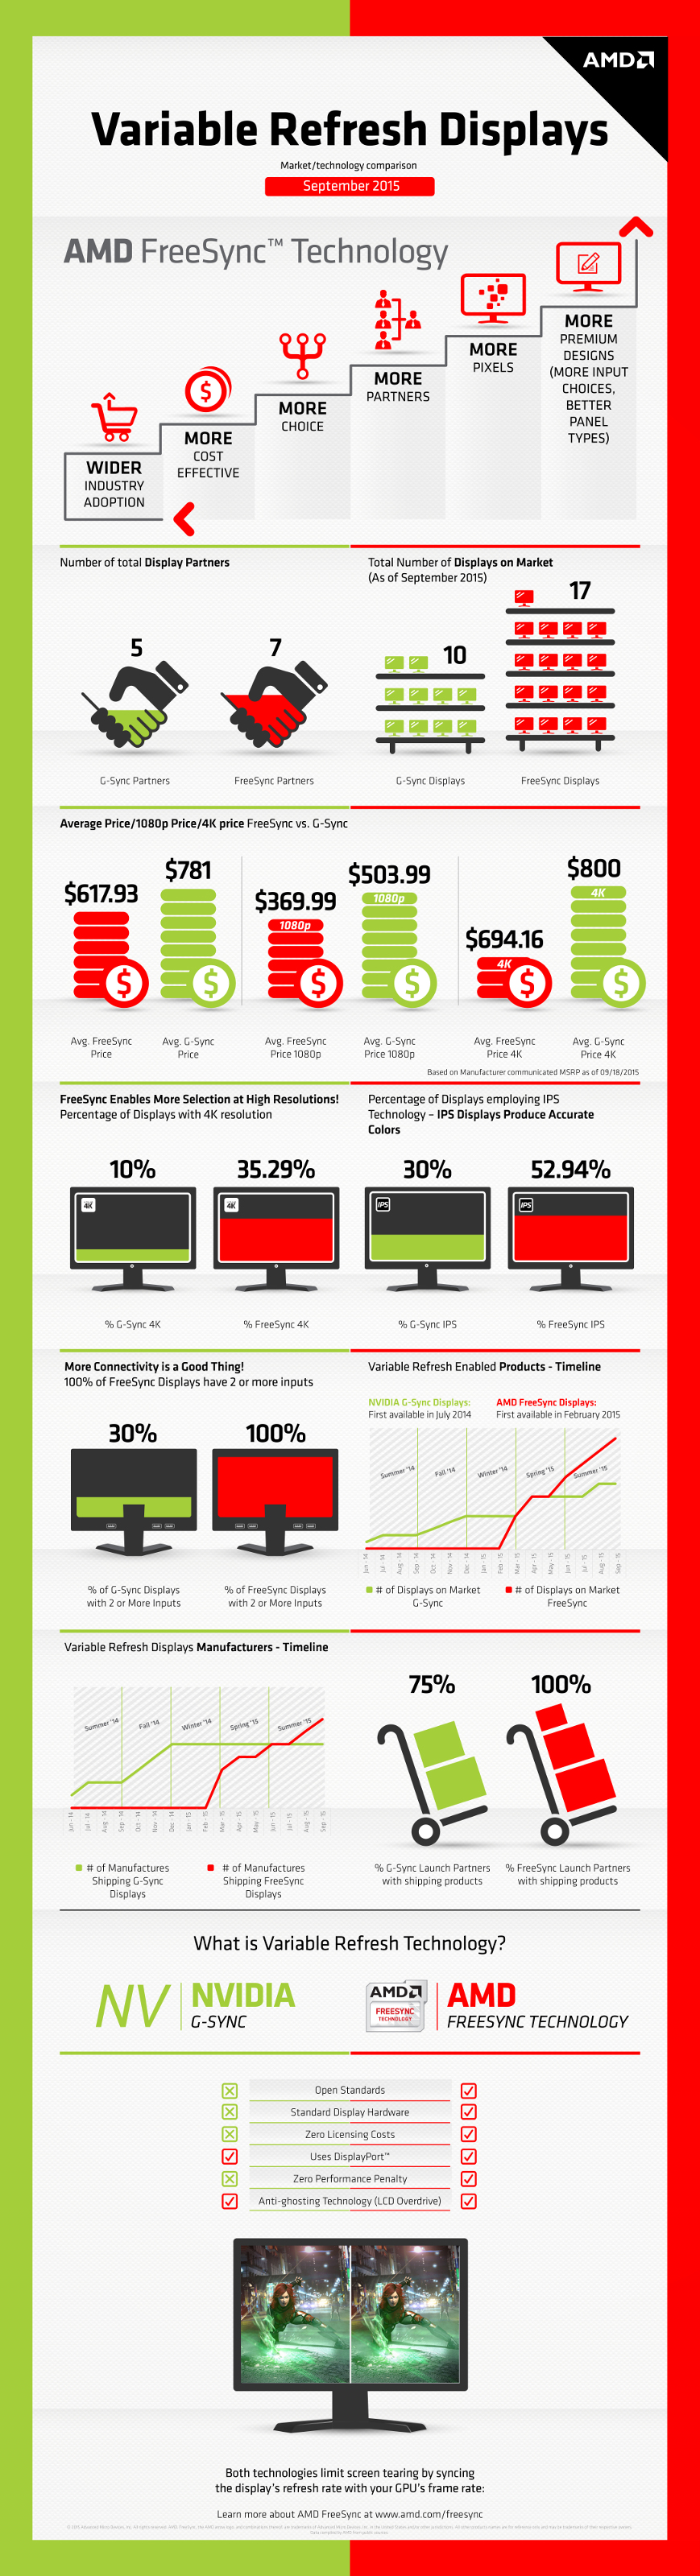 AMD made an infographic comparing FreeSync with G-Sync